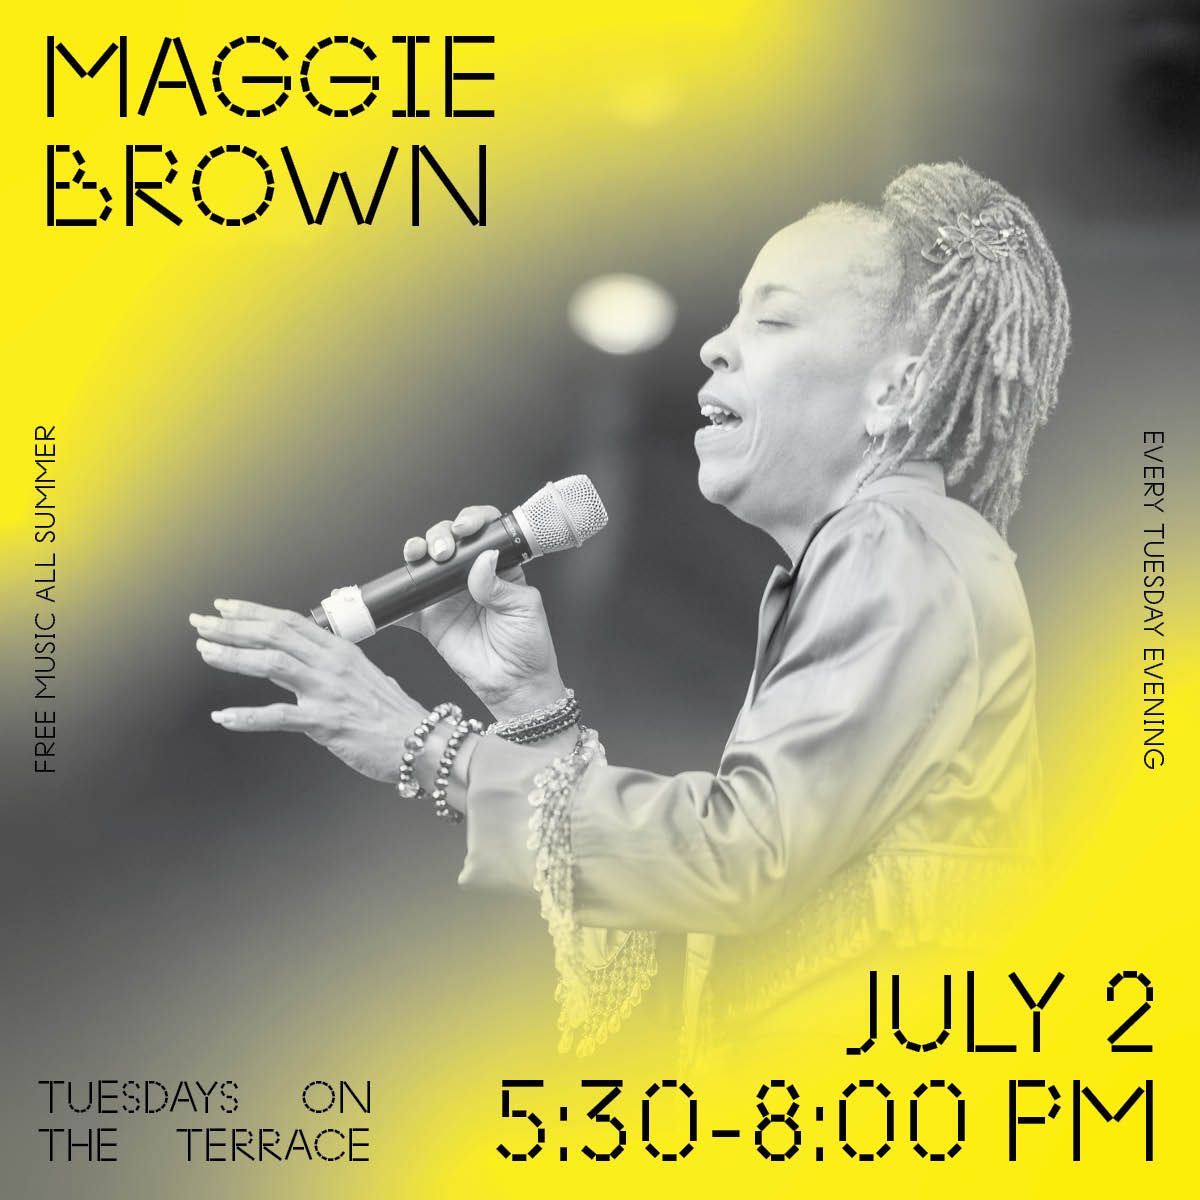 Tuesdays on the Terrace | Maggie Brown